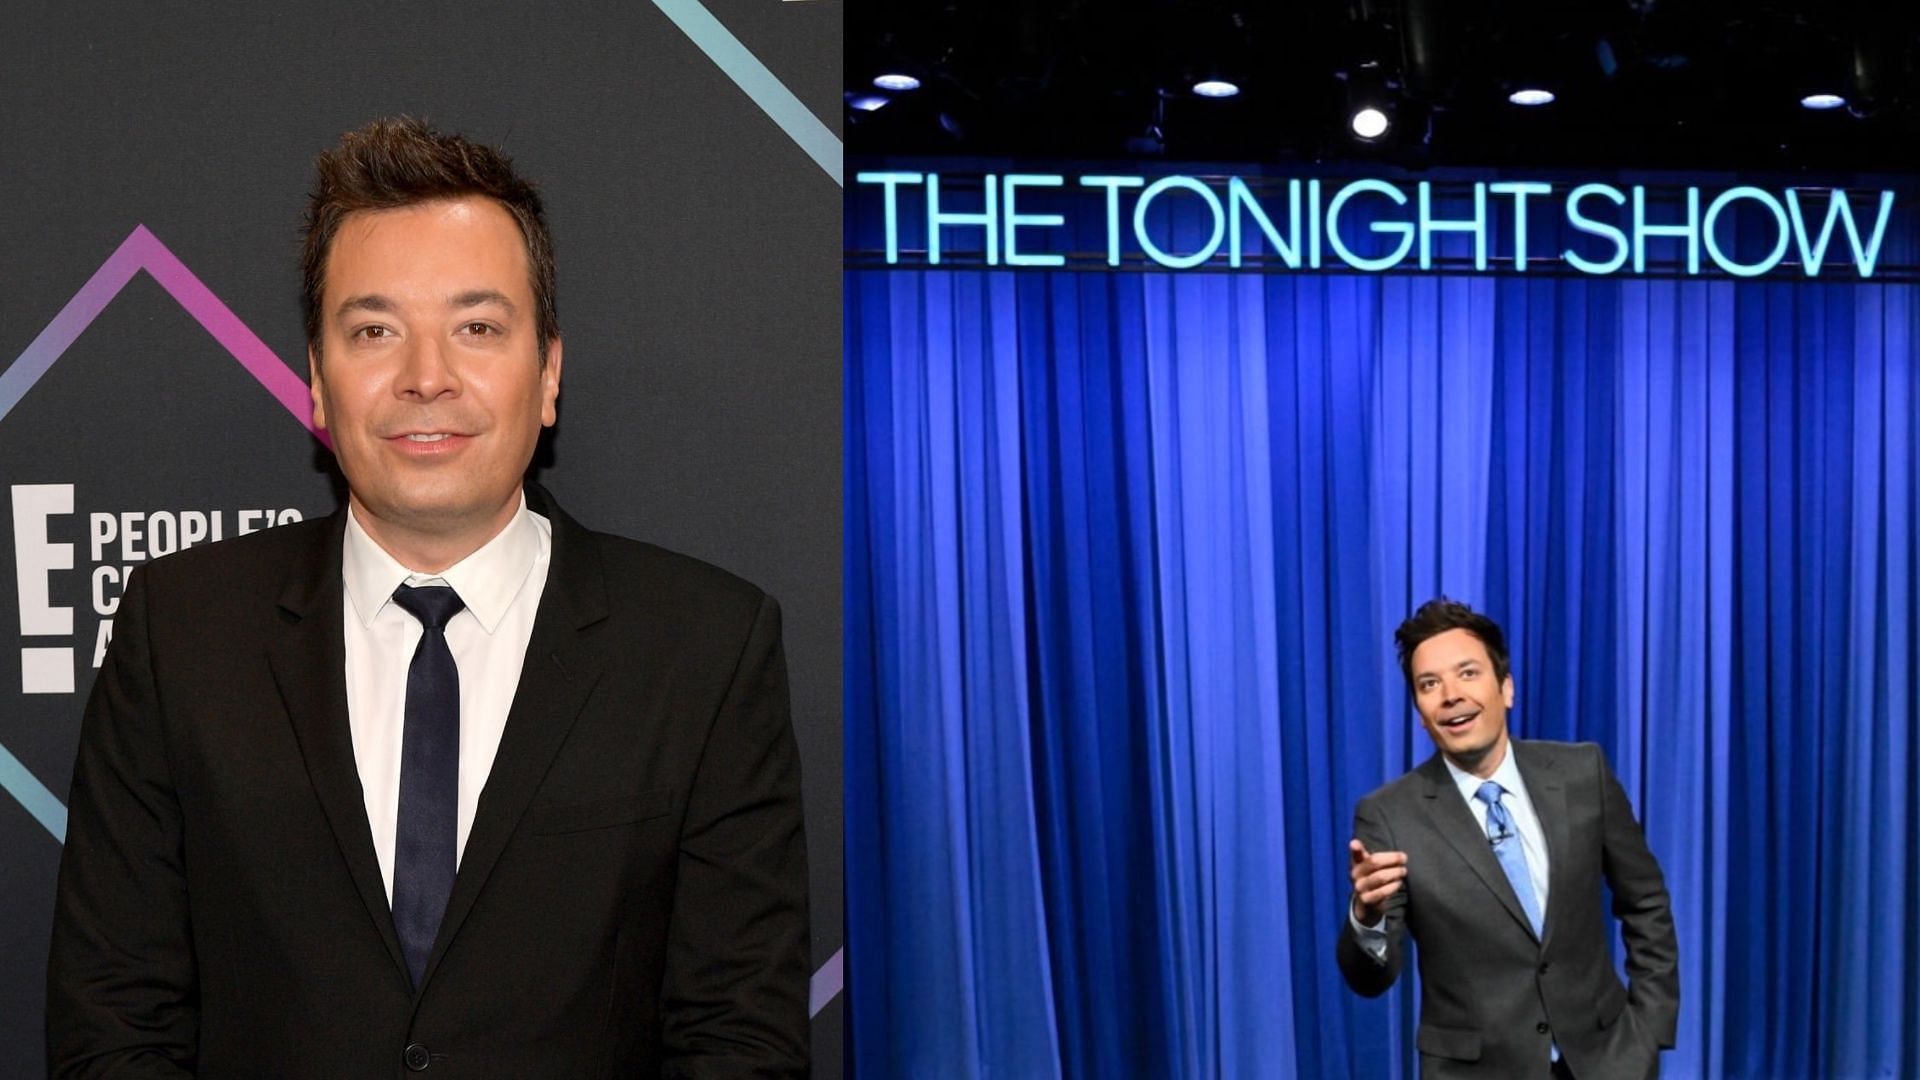 Jimmy Fallon has been accused of creating toxic work environment. (Images via Getty Images)